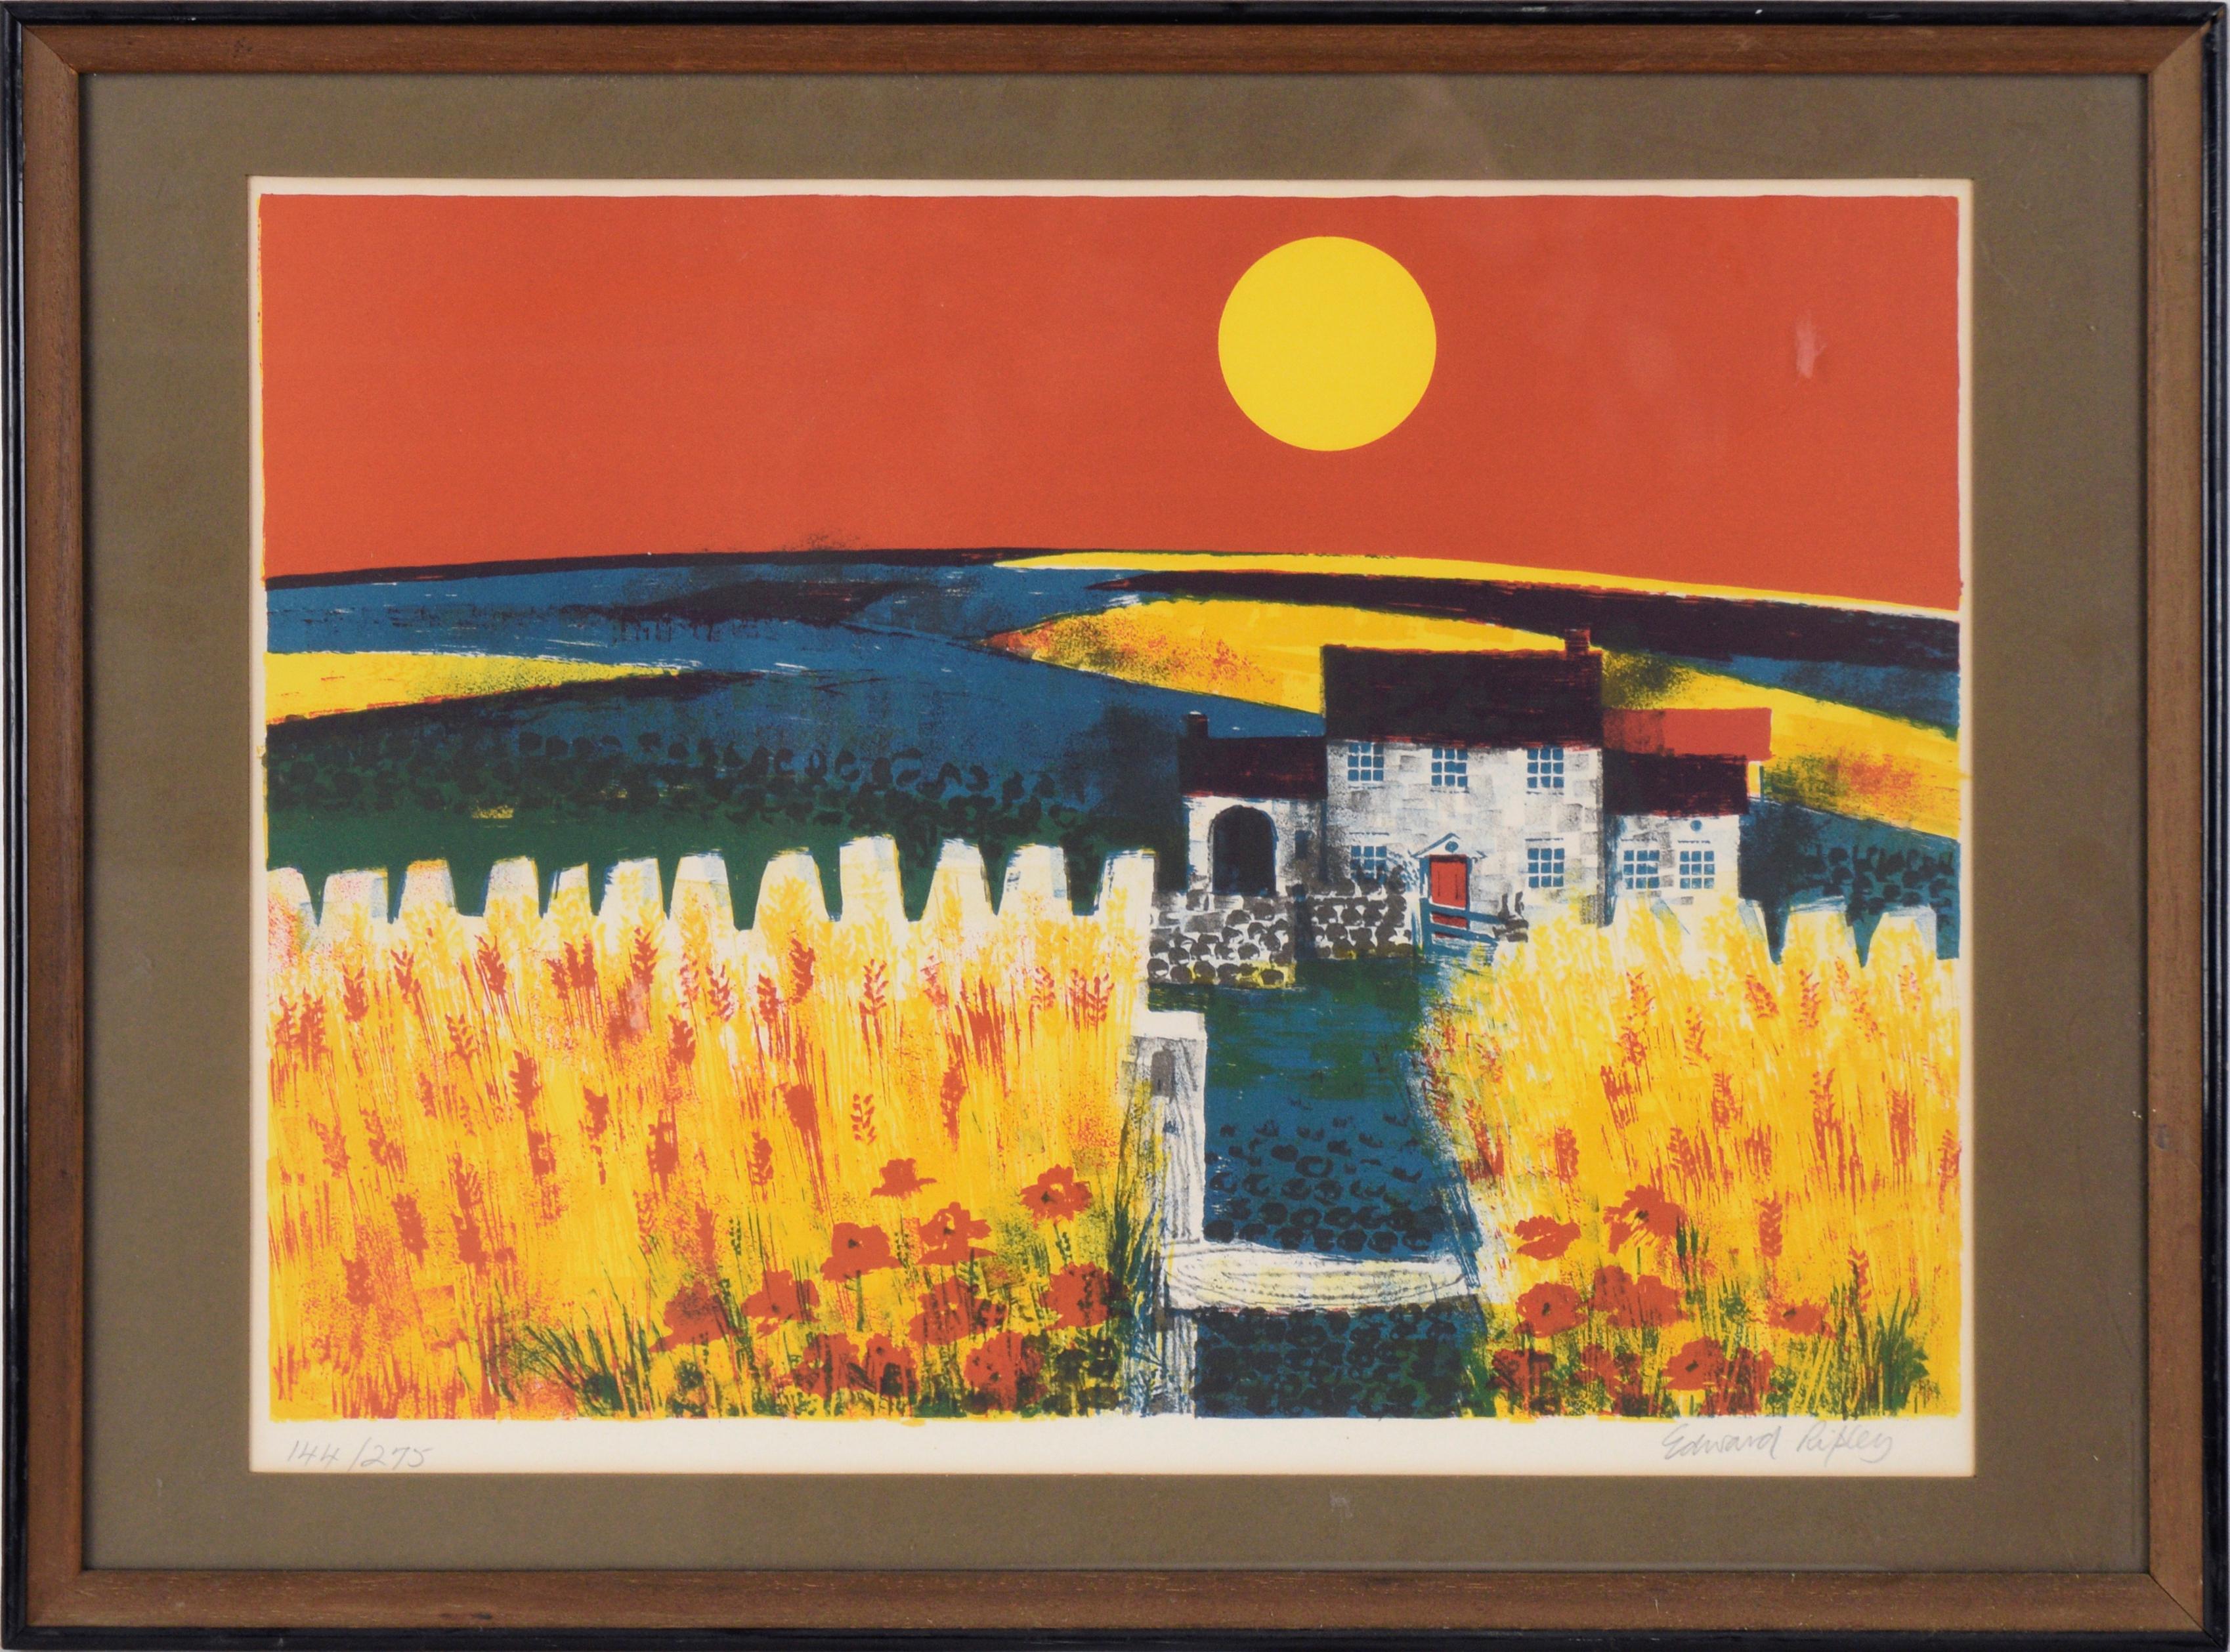 Edward Ripley Landscape Print - Farmhouse and the Wheat Field at Sunset - Landscape Lithograph in Ink on Paper